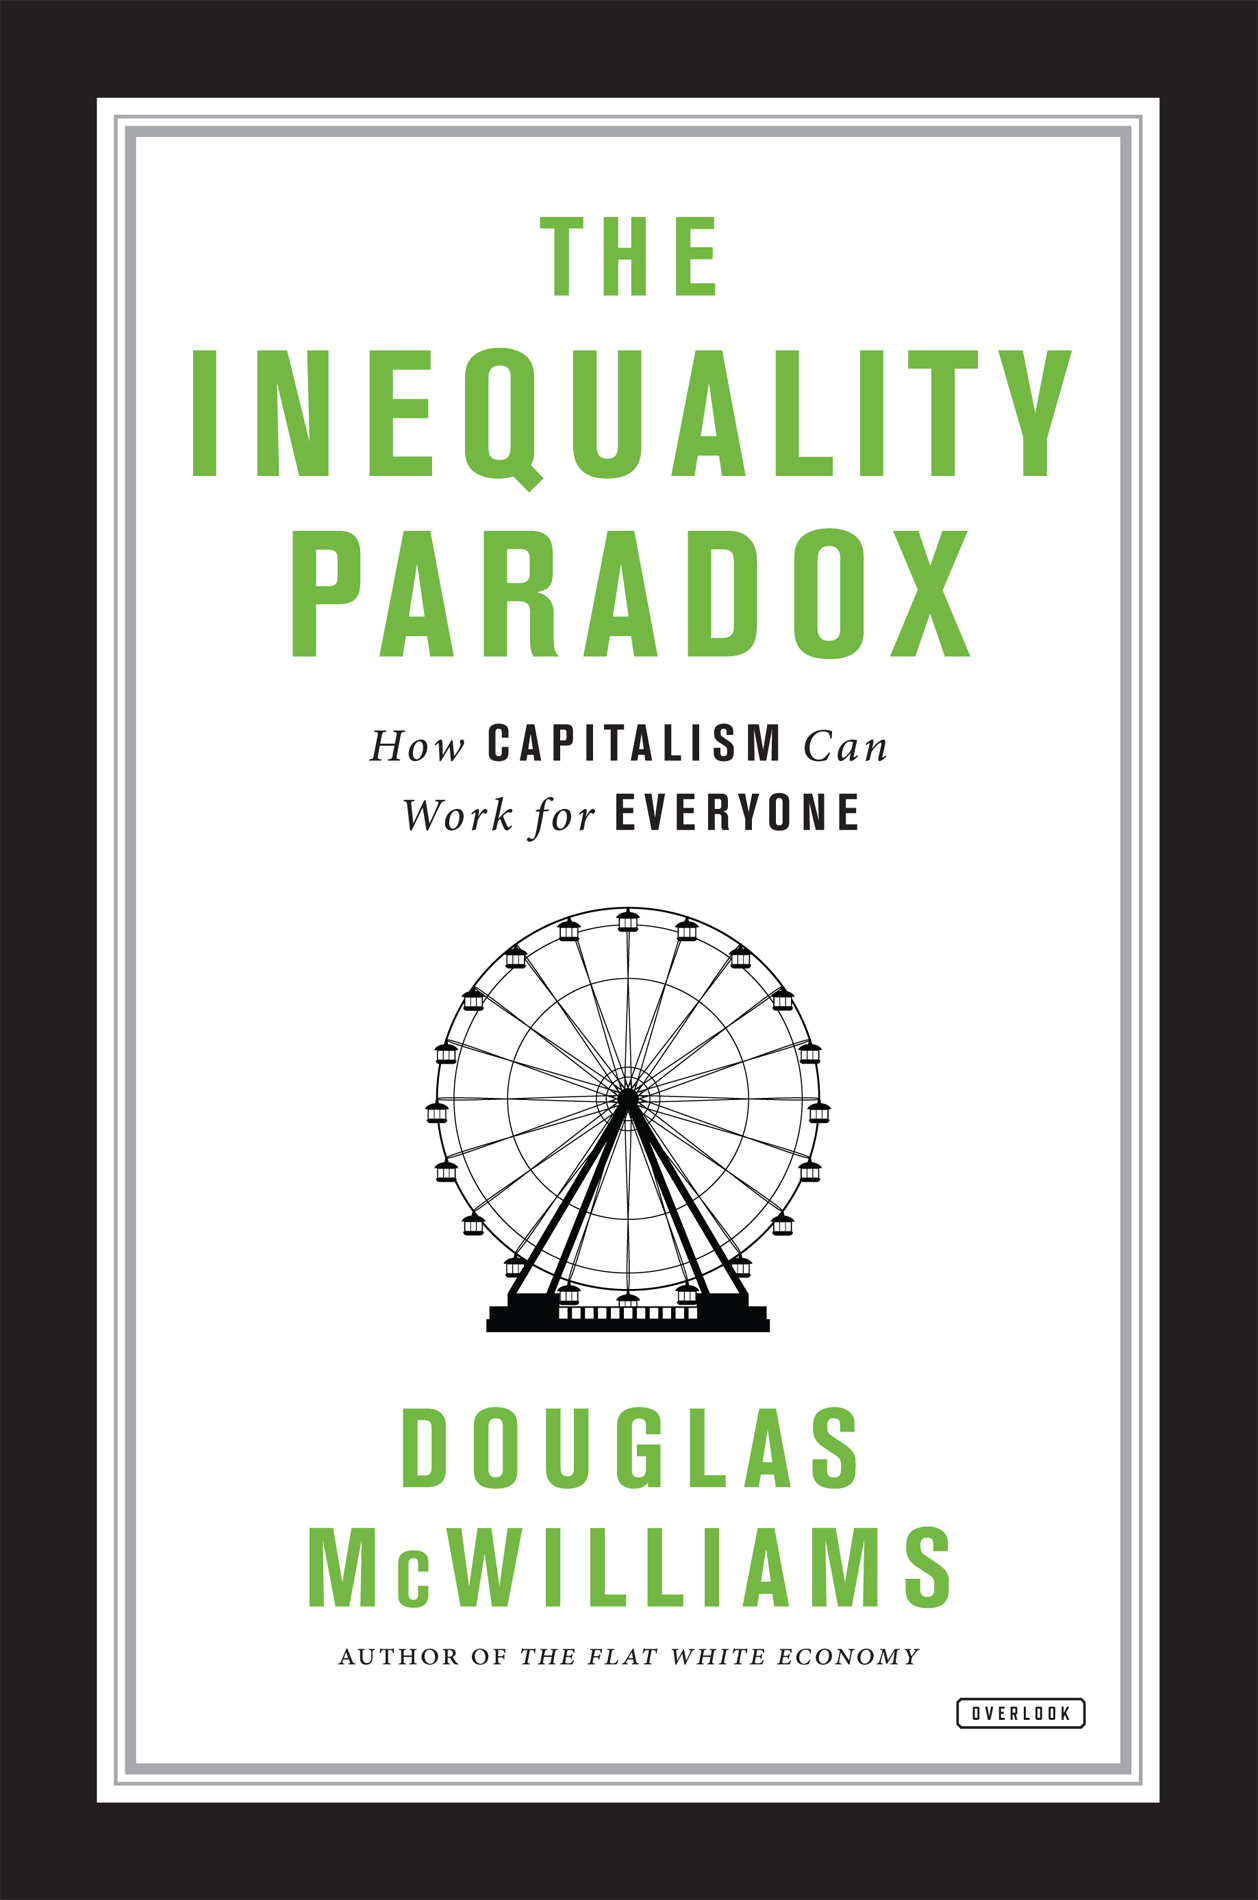 The Inequality Paradox